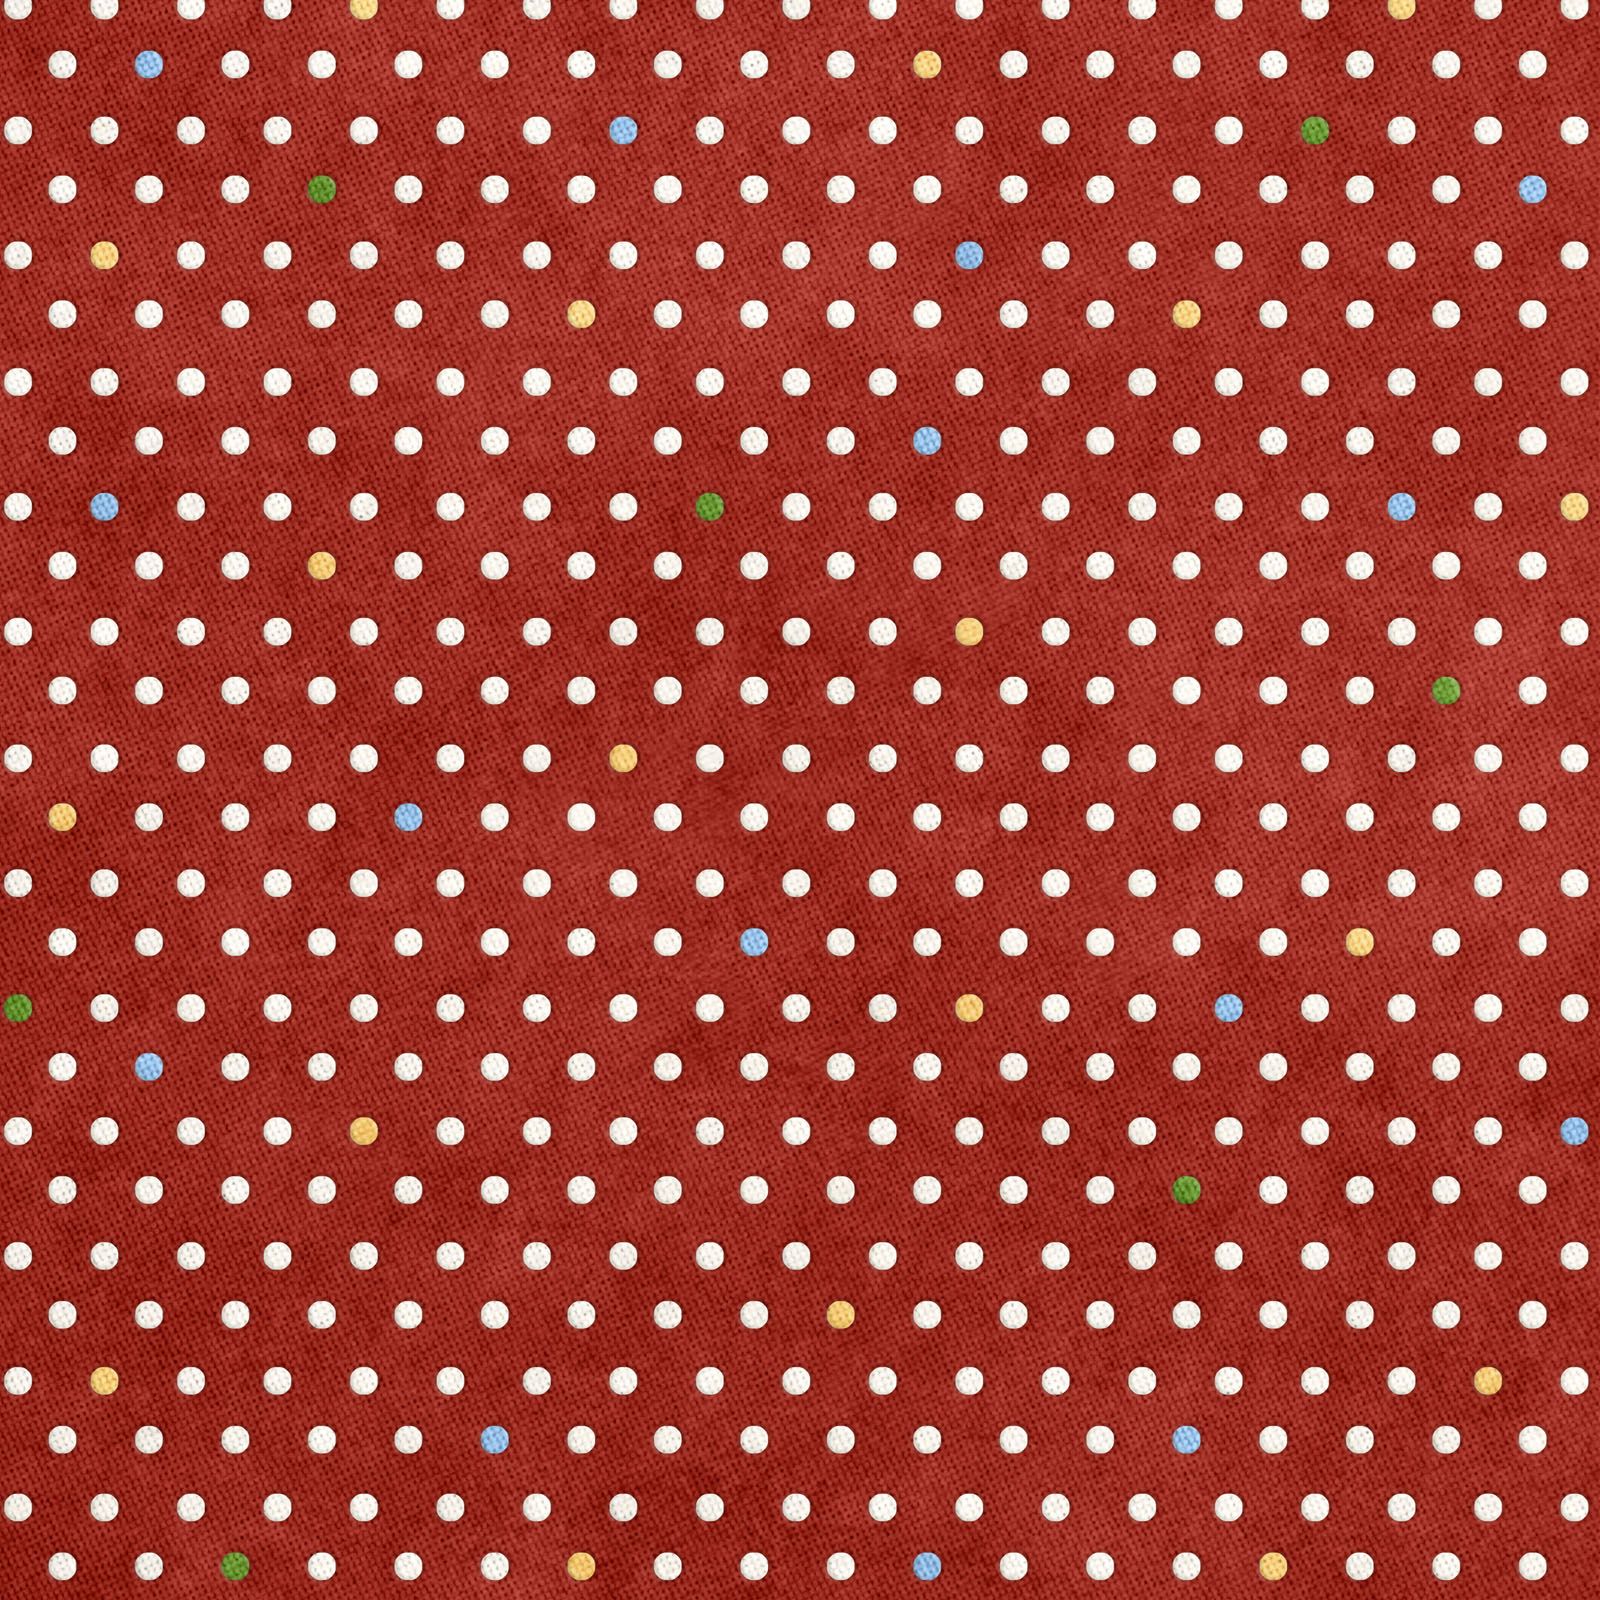 ✓Textured Red with White & Colored Dots Wrapping or Scrapbook Paper ...